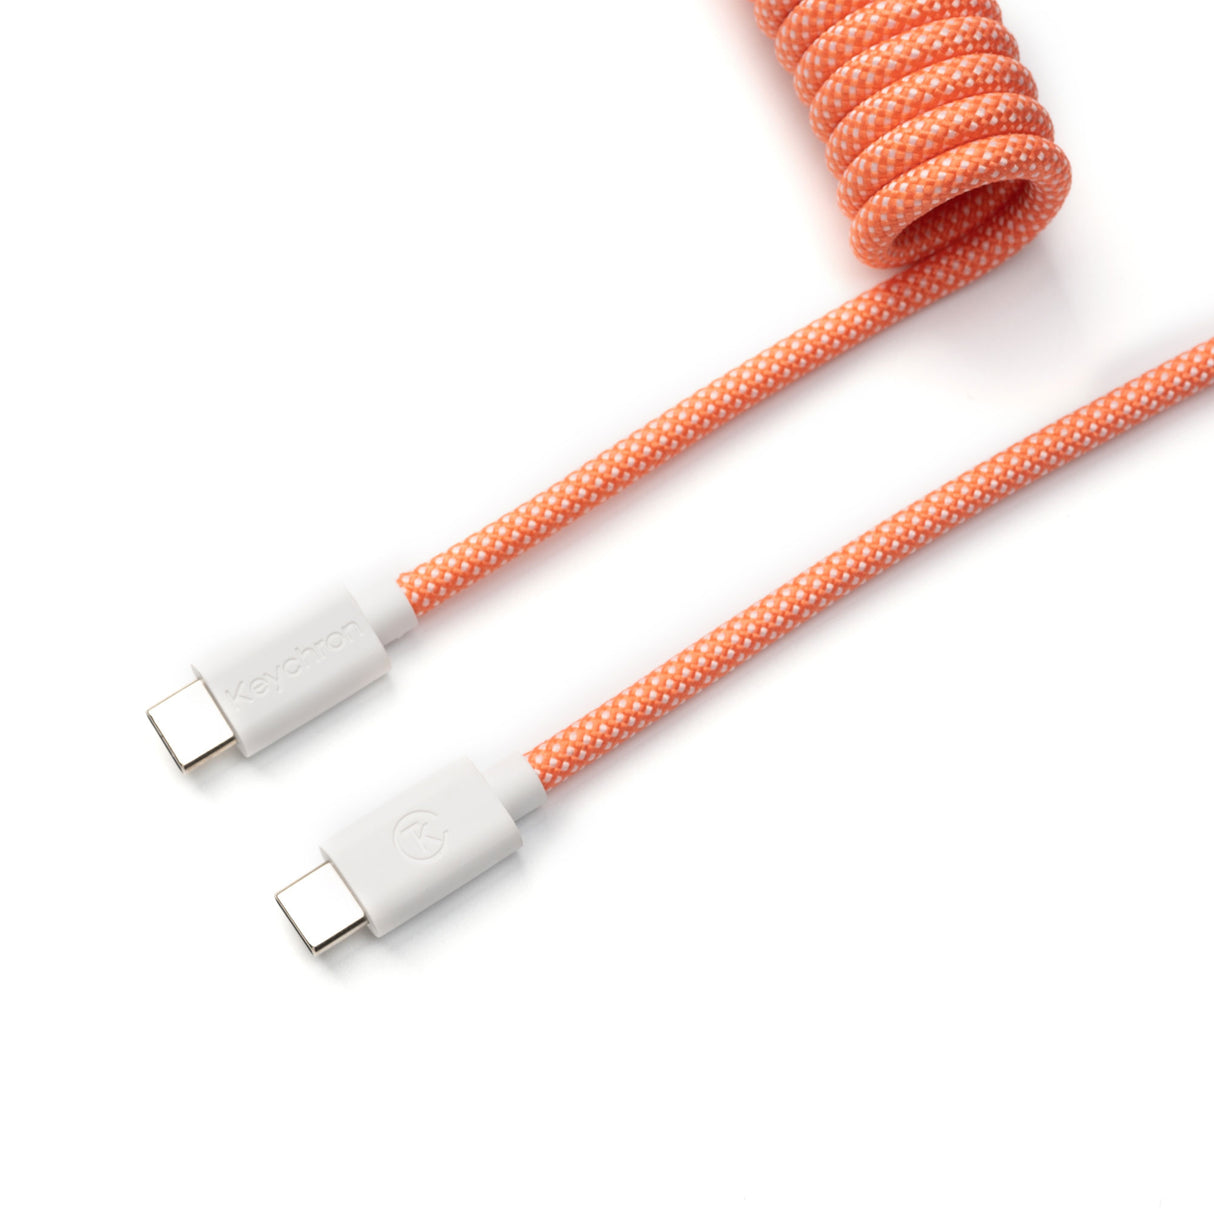 Glorious Coiled Keyboard Cable – Coiled USB C Cable Artisan Braided Cables  for Mechanical Gaming Keyboard Coiled Cable - Custom Keyboard Cable (Red)